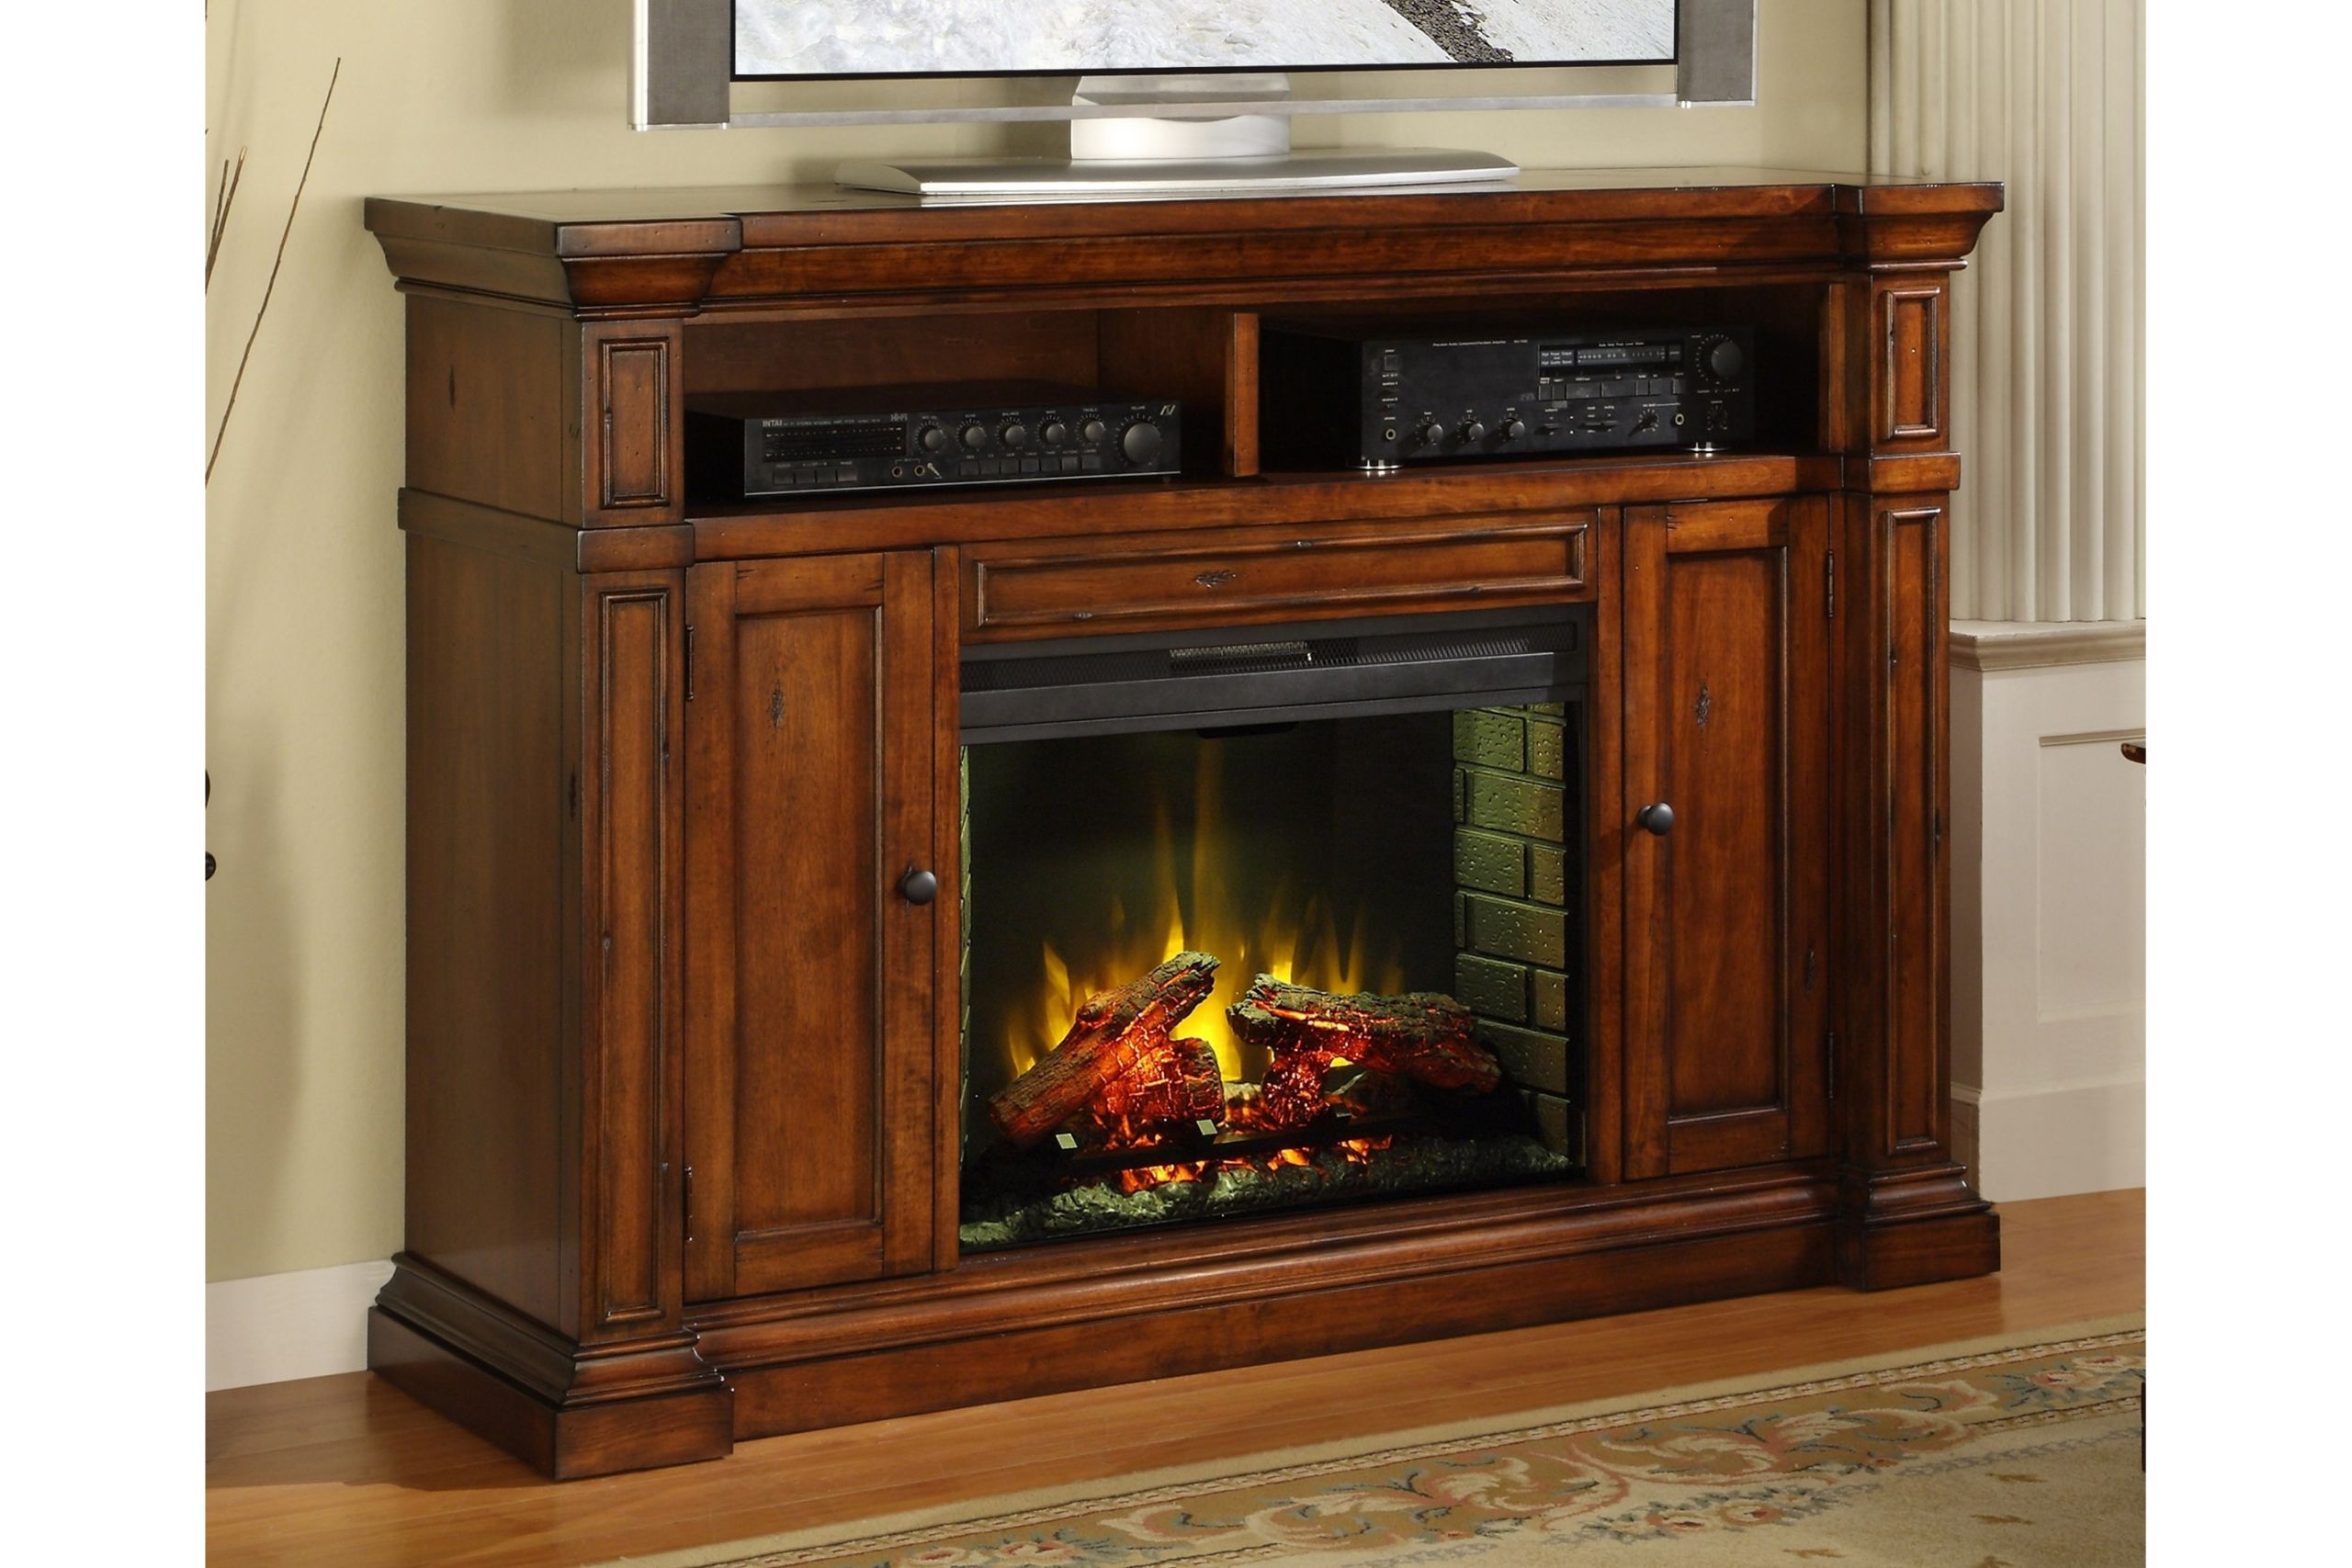 Corner Electric Fireplace Lowes
 Ideas Best Electric Fireplaces At Lowes For Living Room